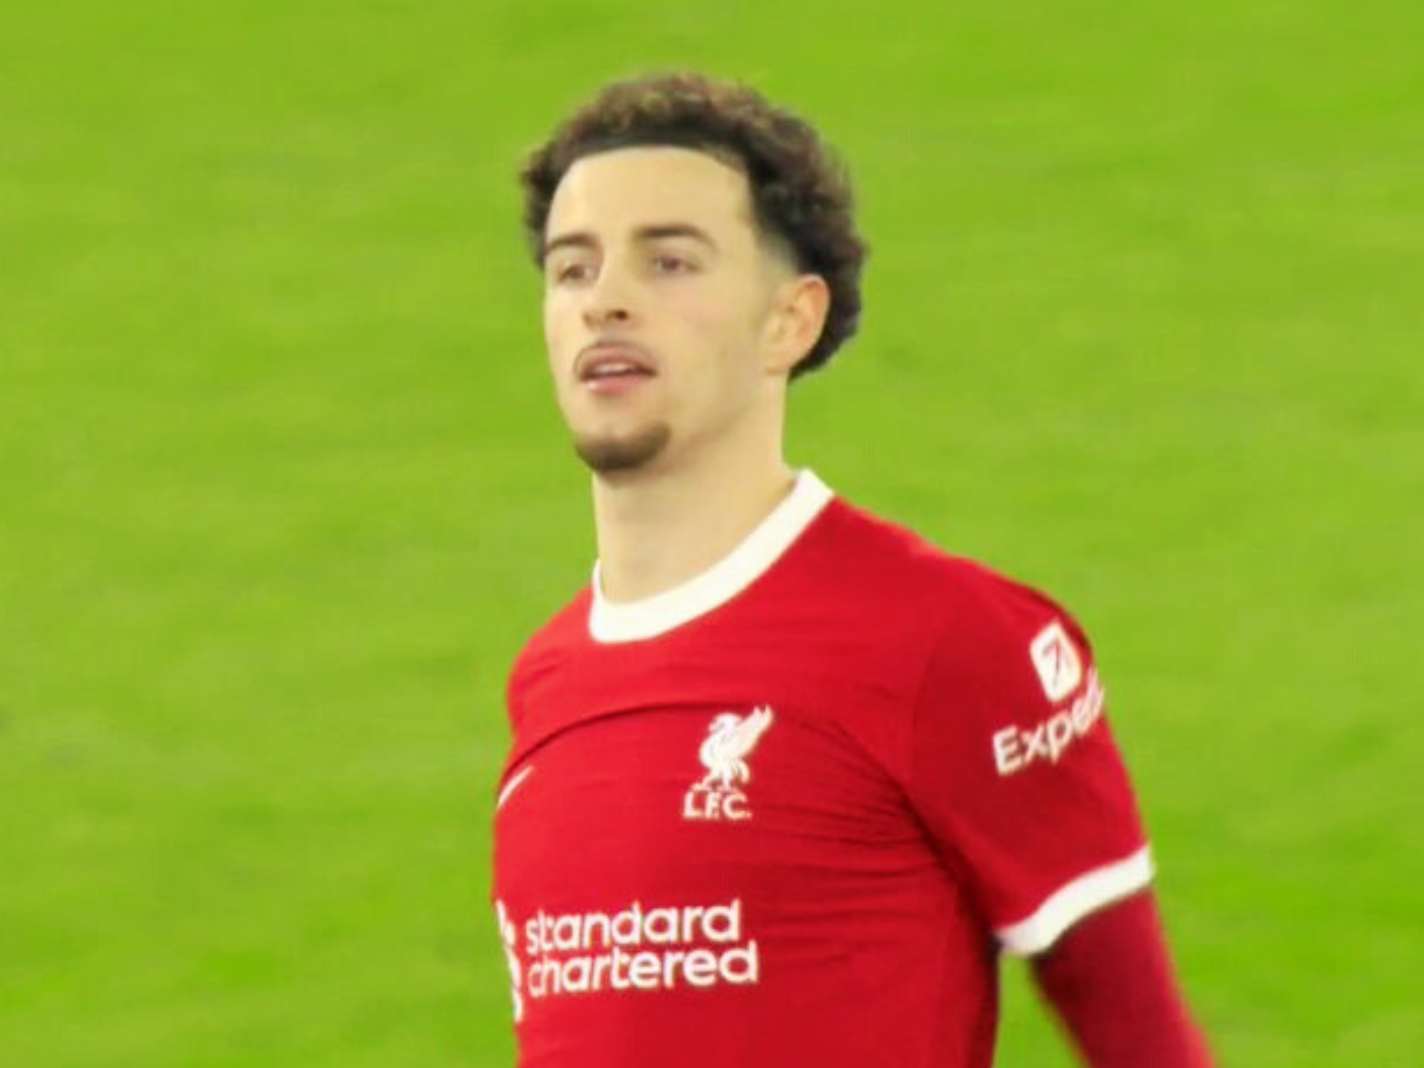 Liverpool Fans Unveil New Curtis Jones Chant Sung to 1988 Hit ‘There She Goes’